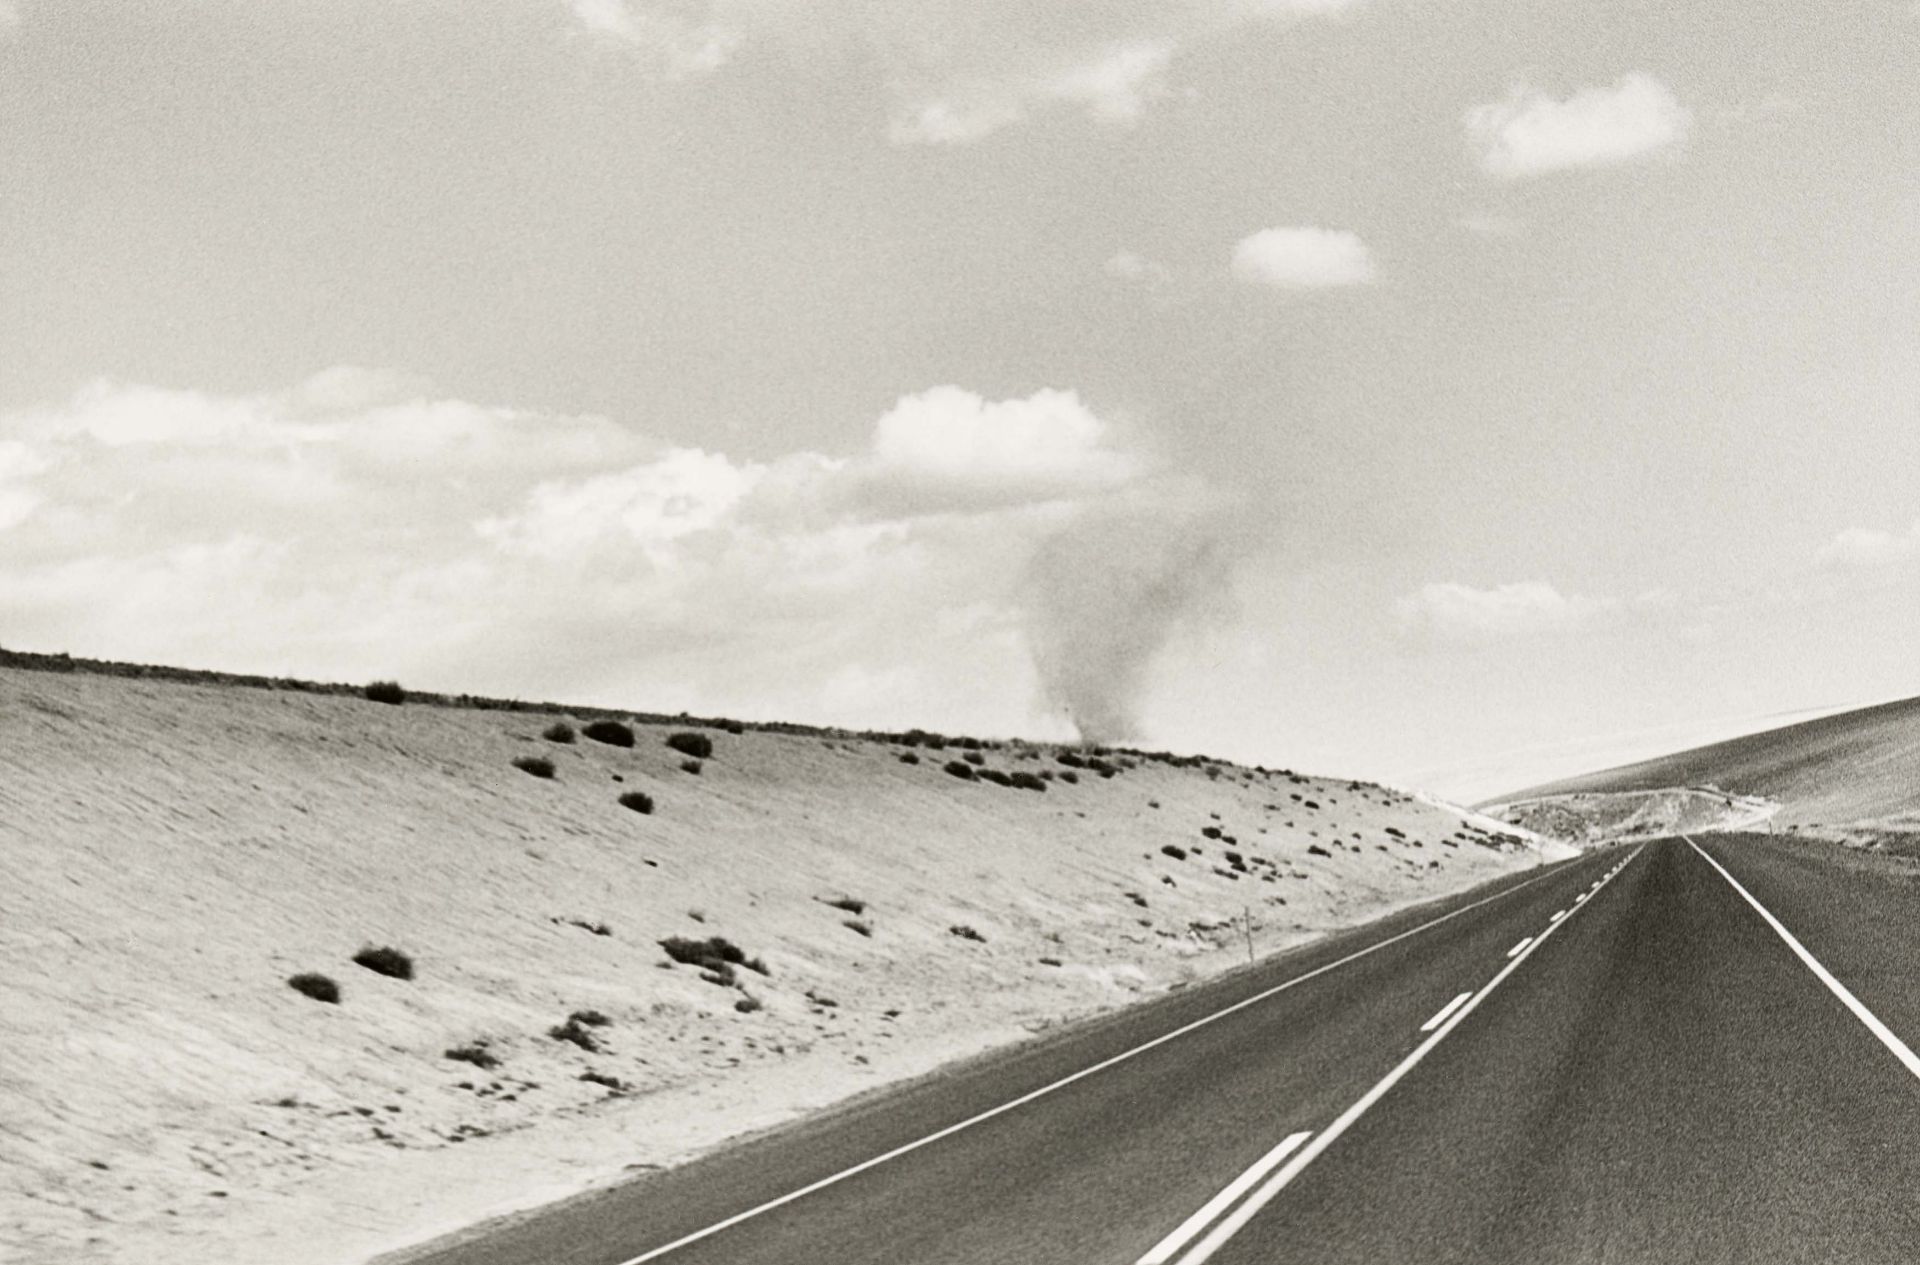 Henry Wessel: Continental Divide - Image 11 of 27